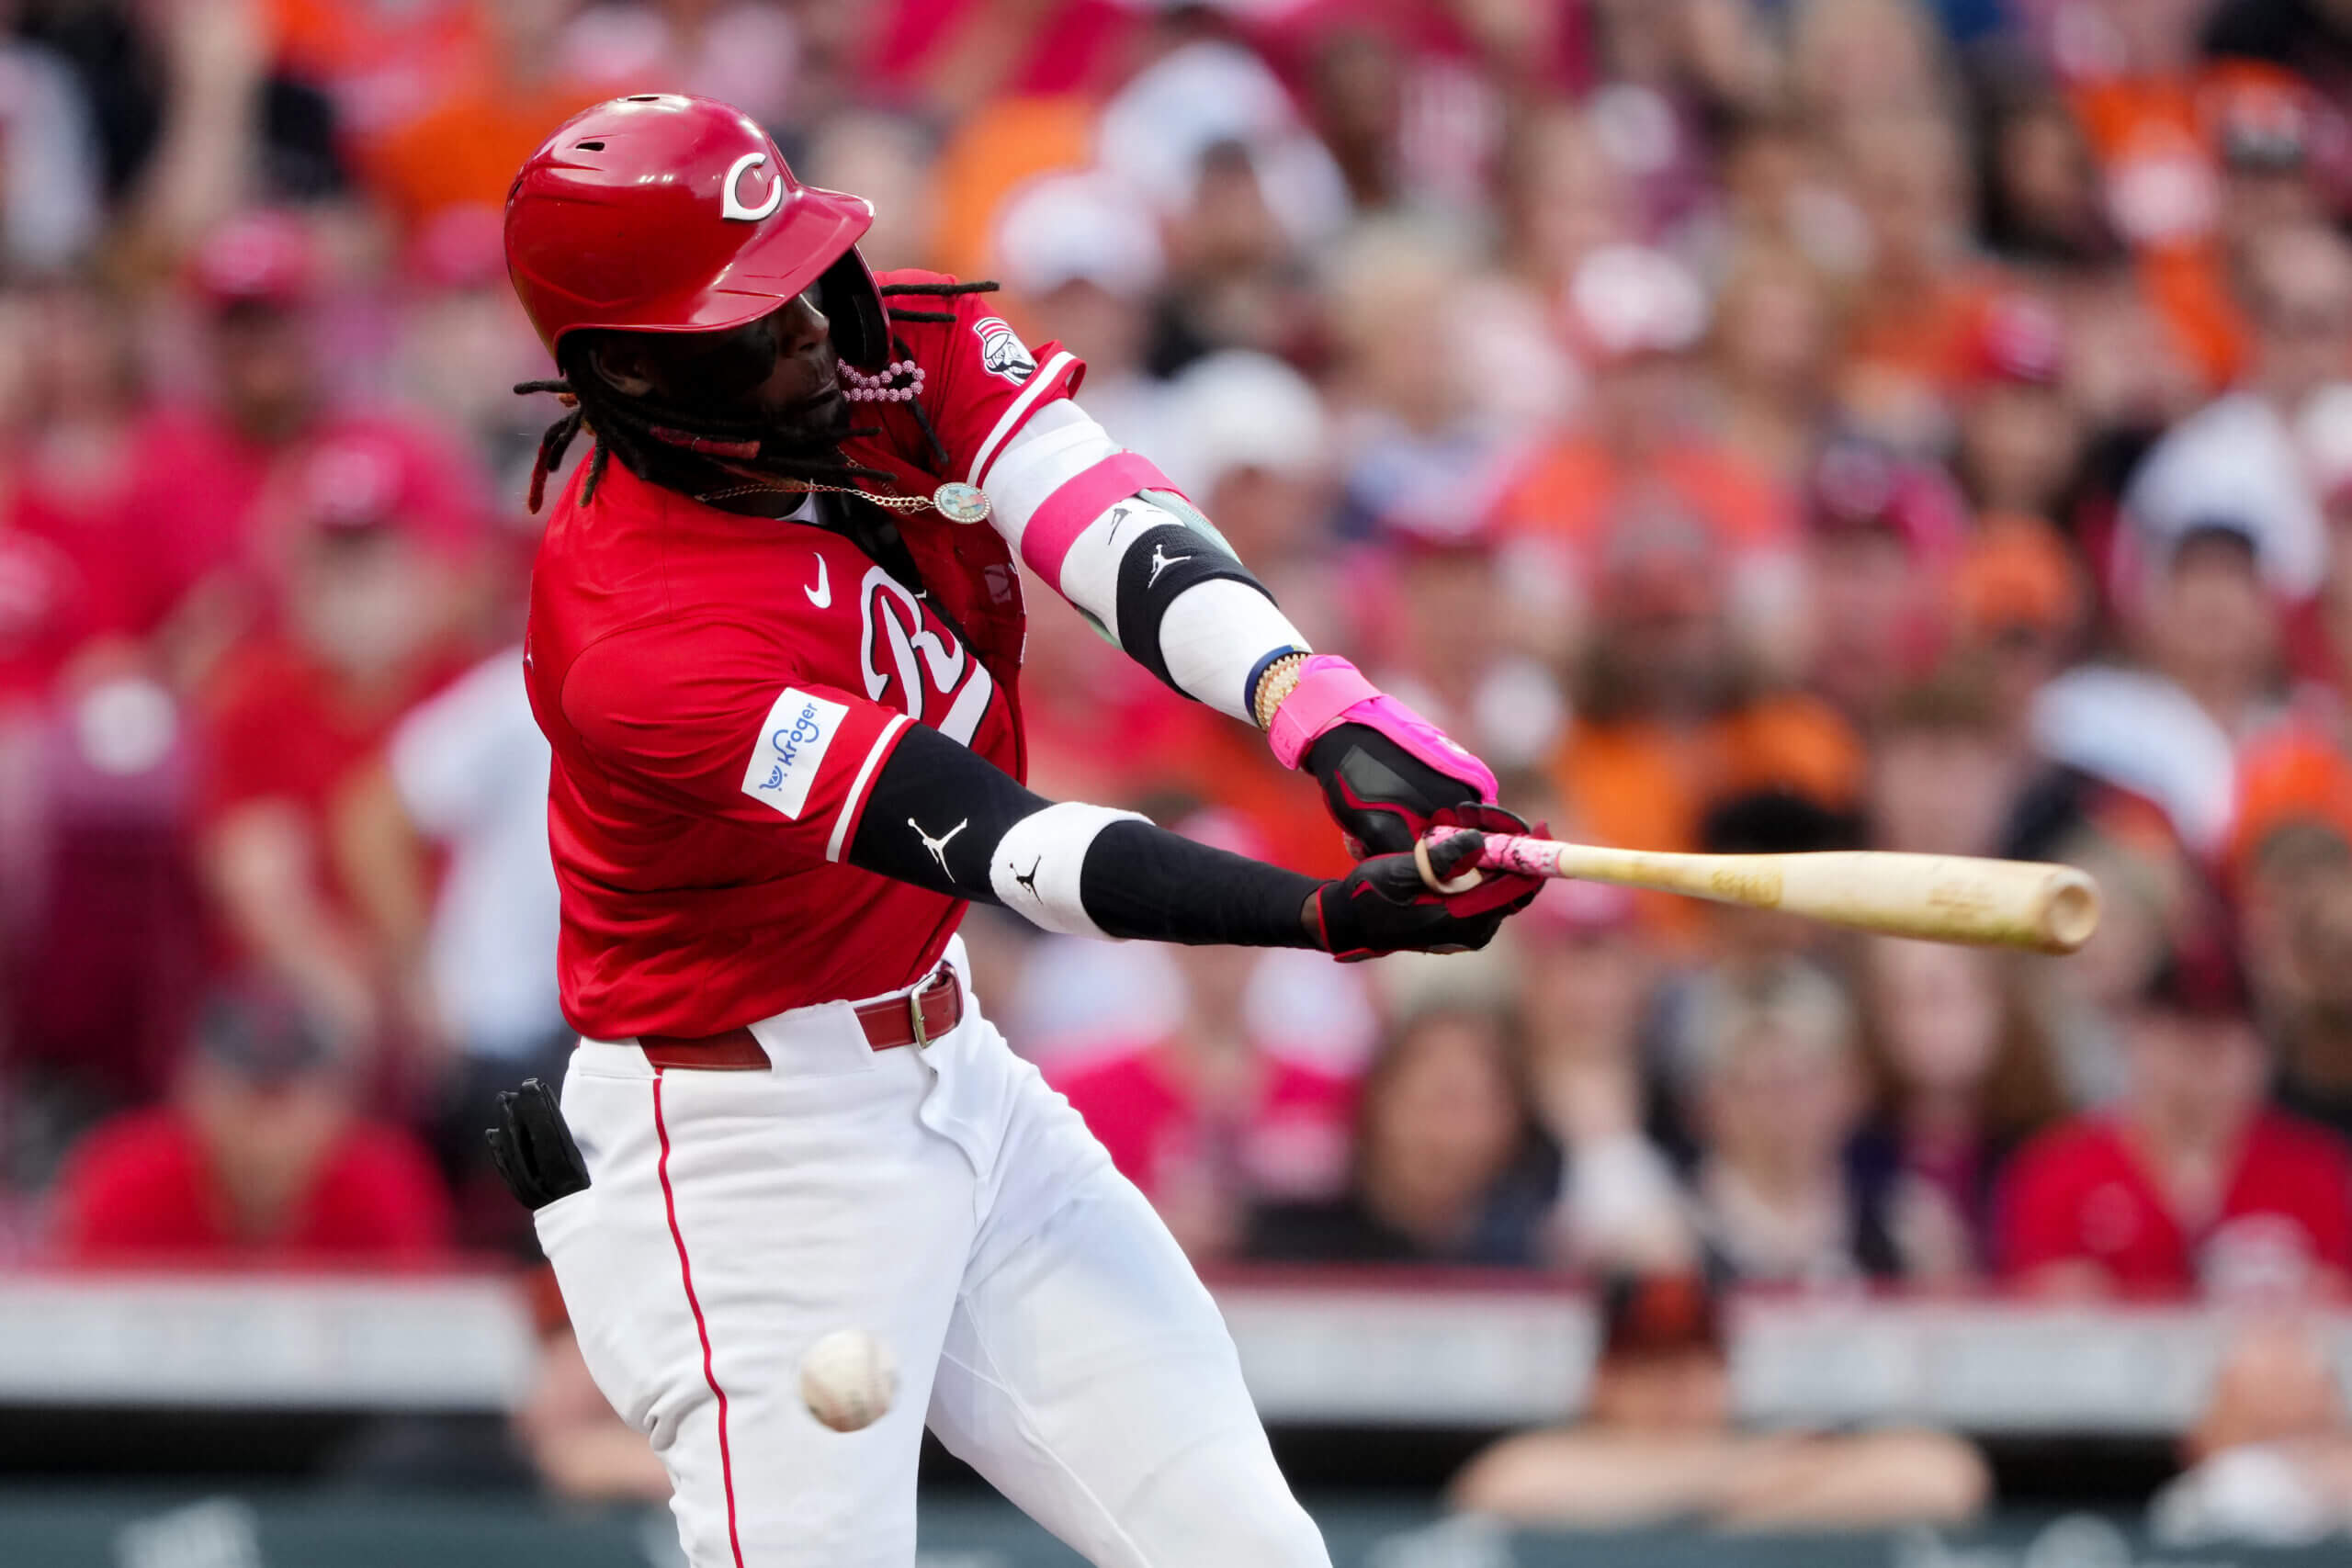 C. Notes: Reds happy to see May behind them after struggling at the plate all month